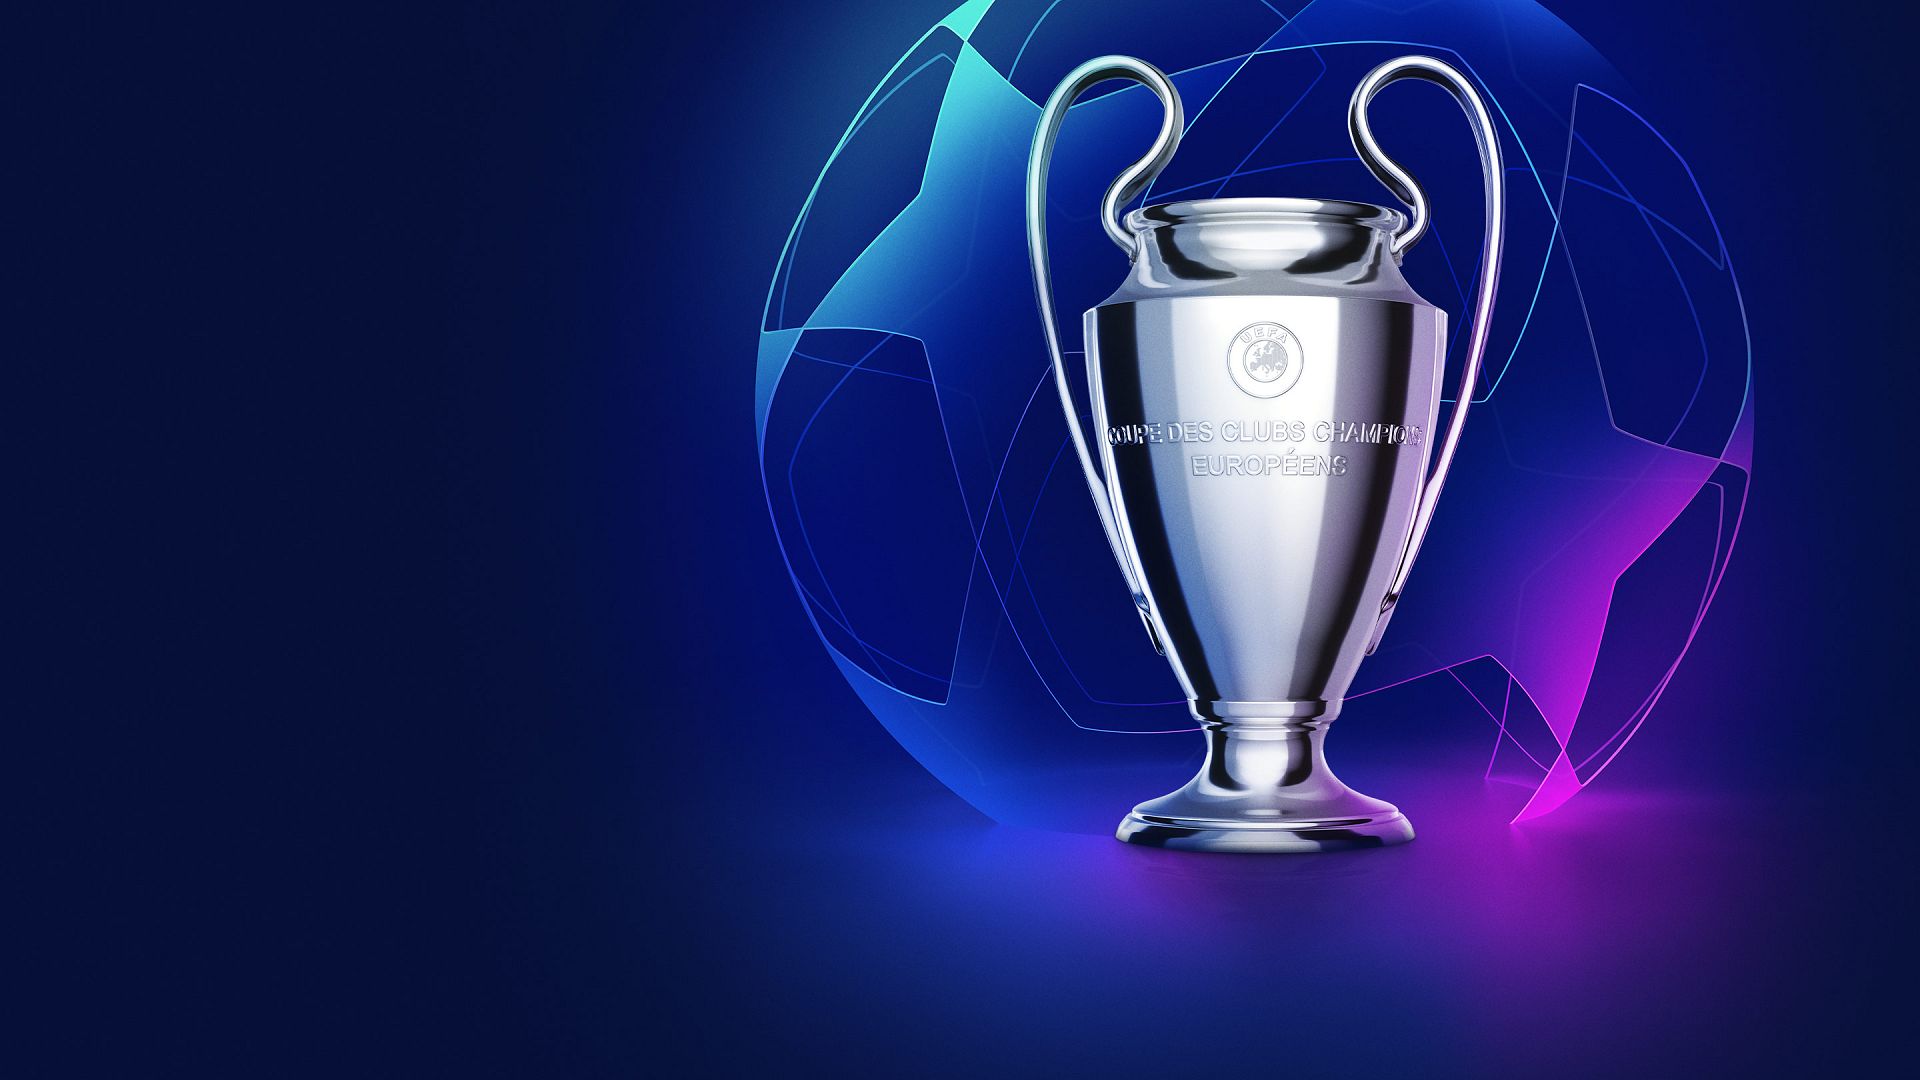 UEFA Champions League Quarter and Semi Finals Watch Party